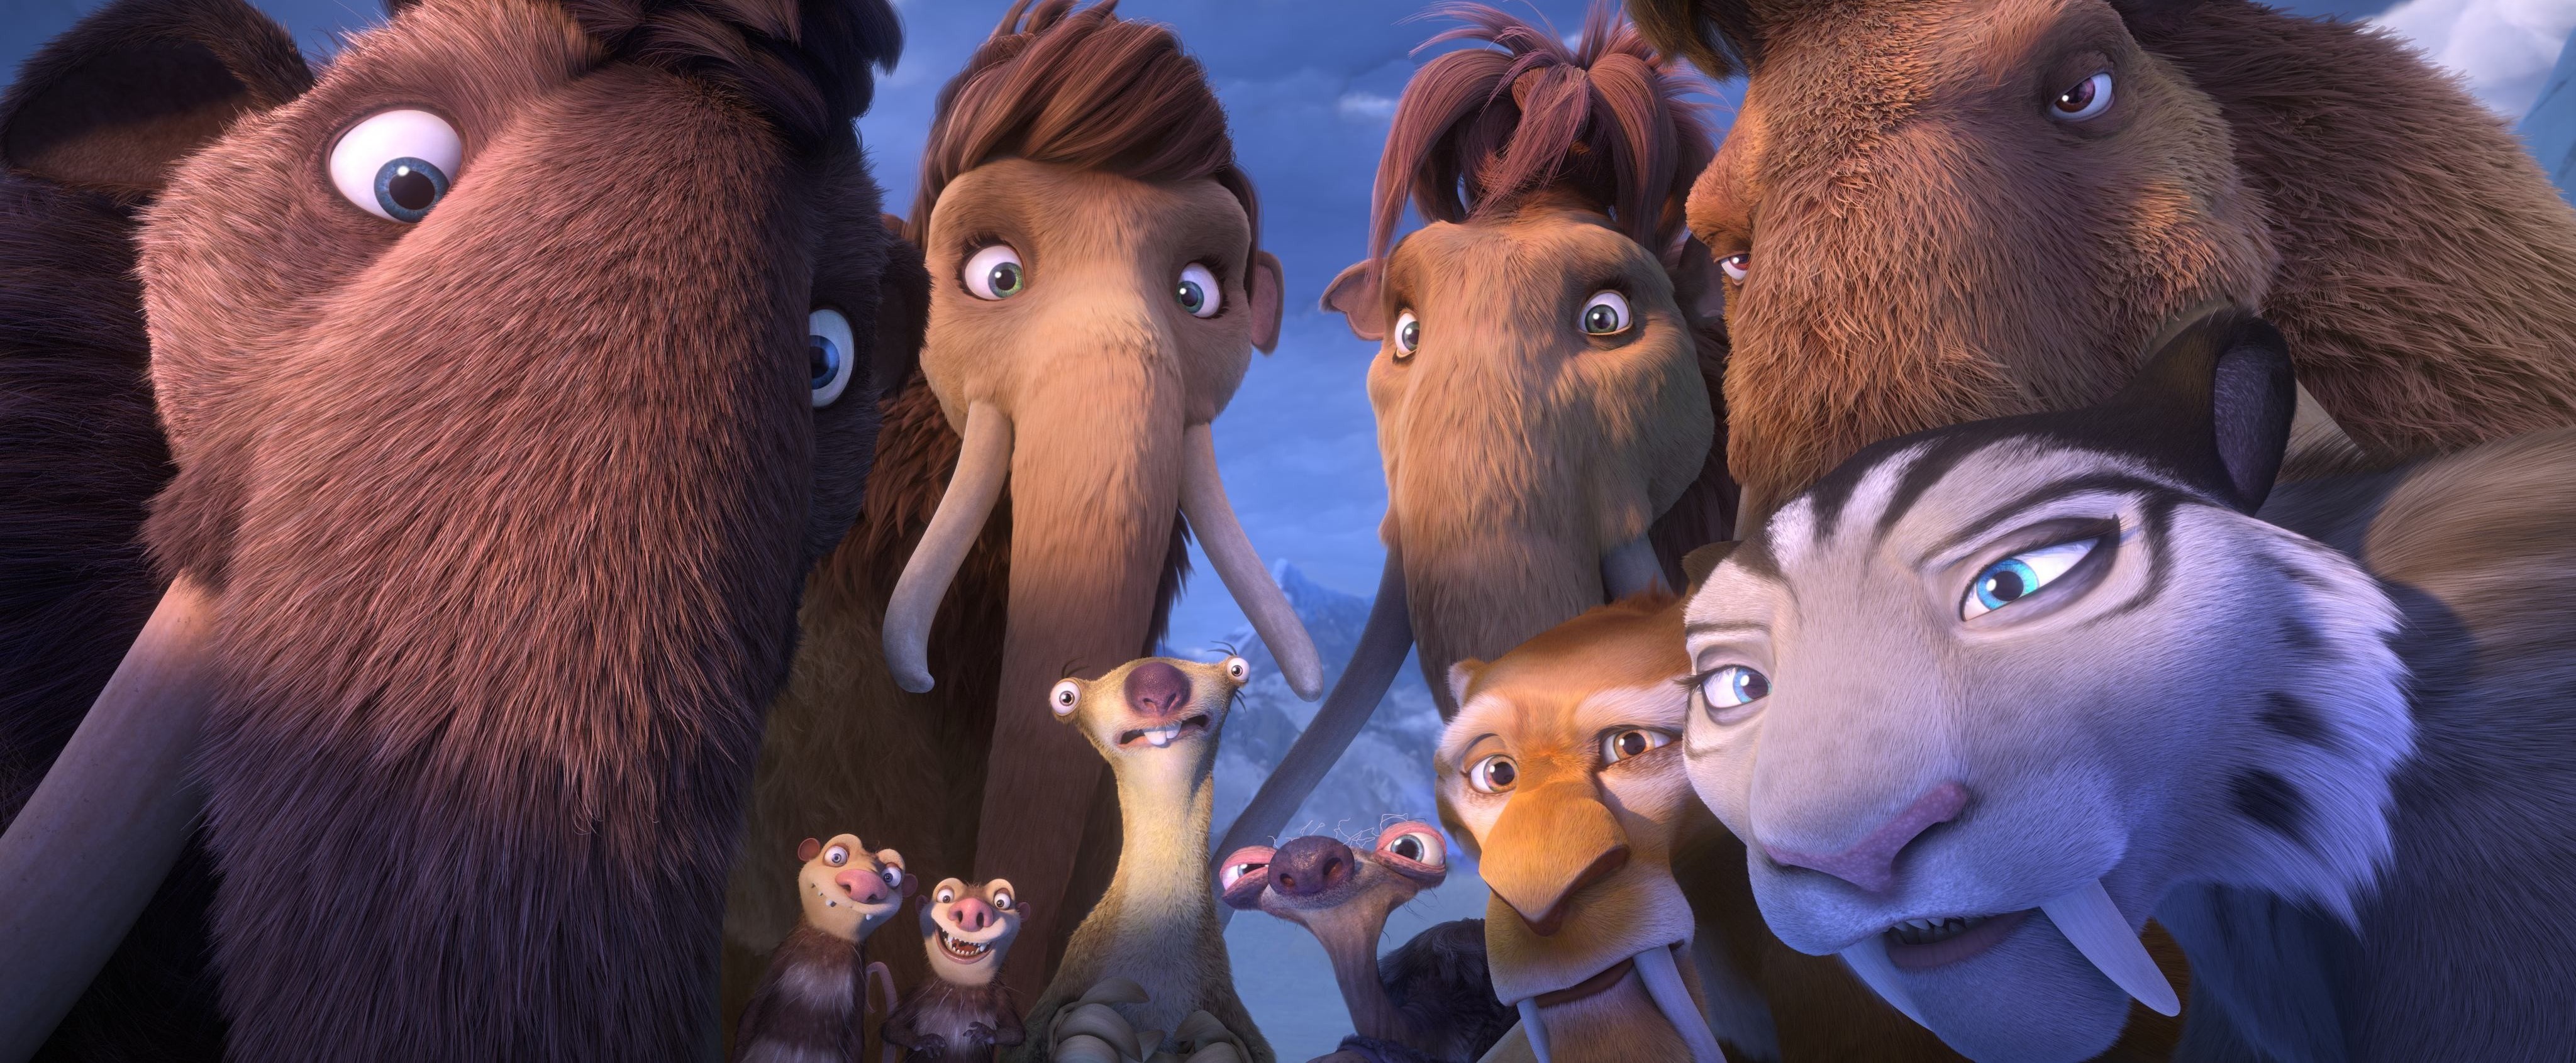 Ice Age Collision Course Sid Ice Age 4096x1691